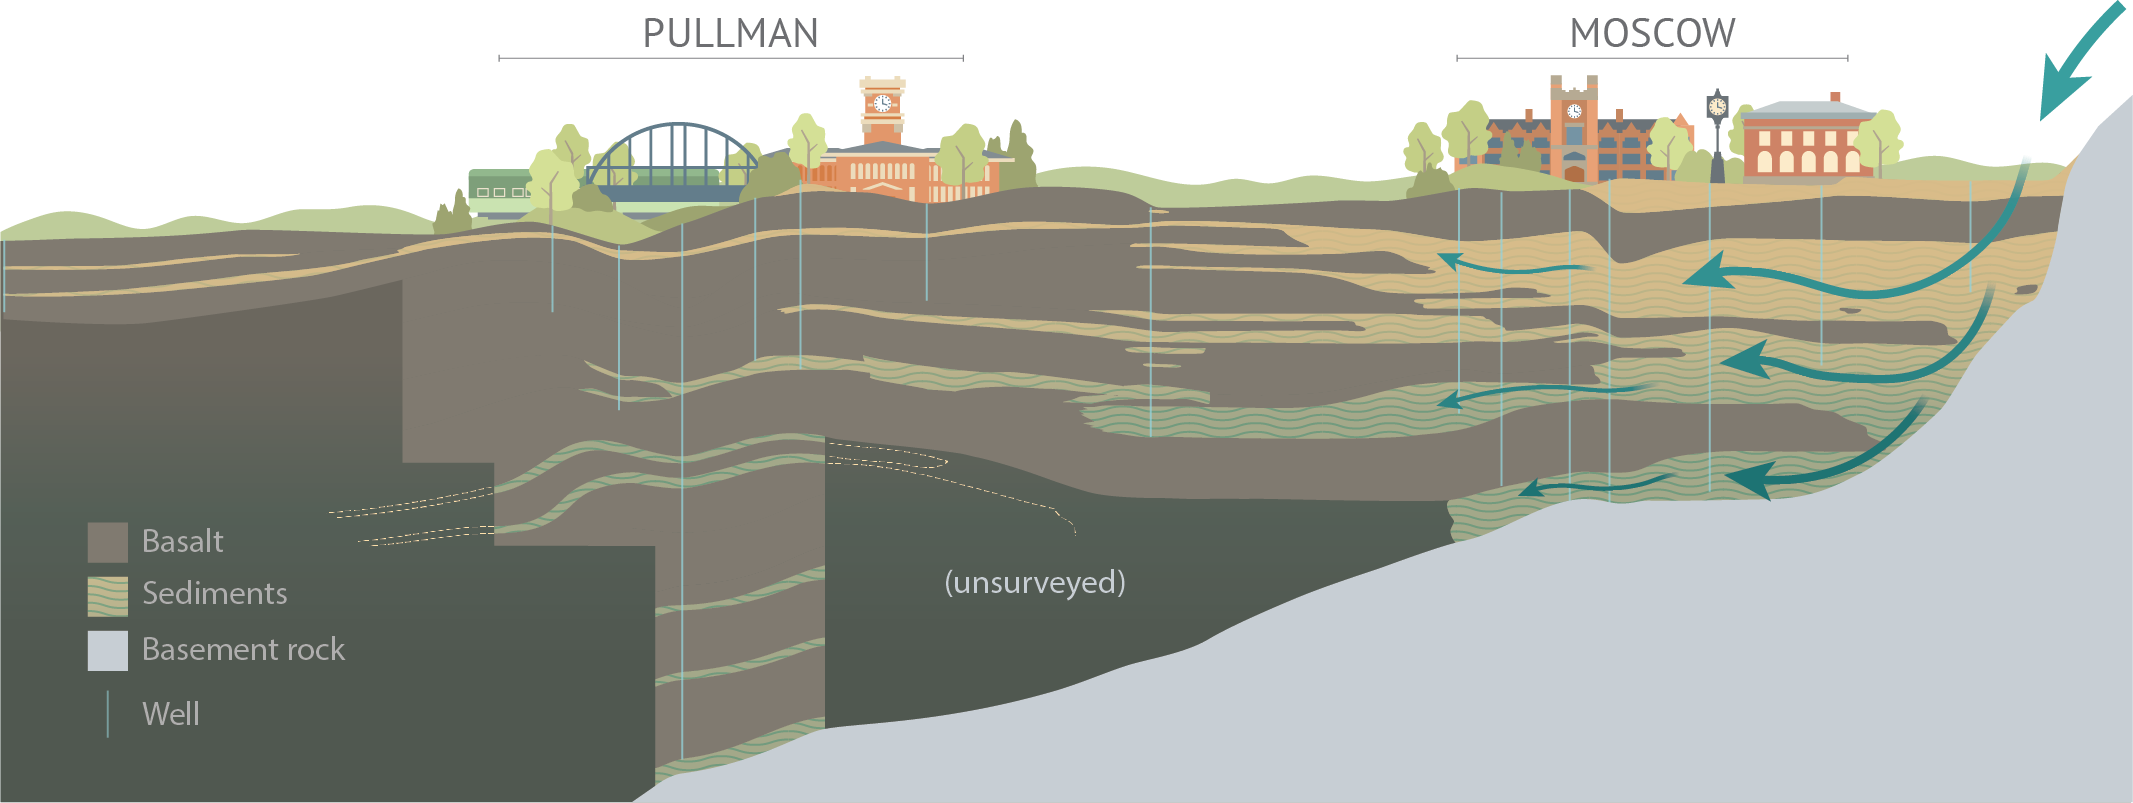 Geological cross section of the Palouse Groundwater Basin, including landmarks of Moscow, Idaho, and Pullman, Washington - layers of the aquifer in brown, yellow and green representing the different geologic members - with teal arrows representing water flow - with a legend in the bottom